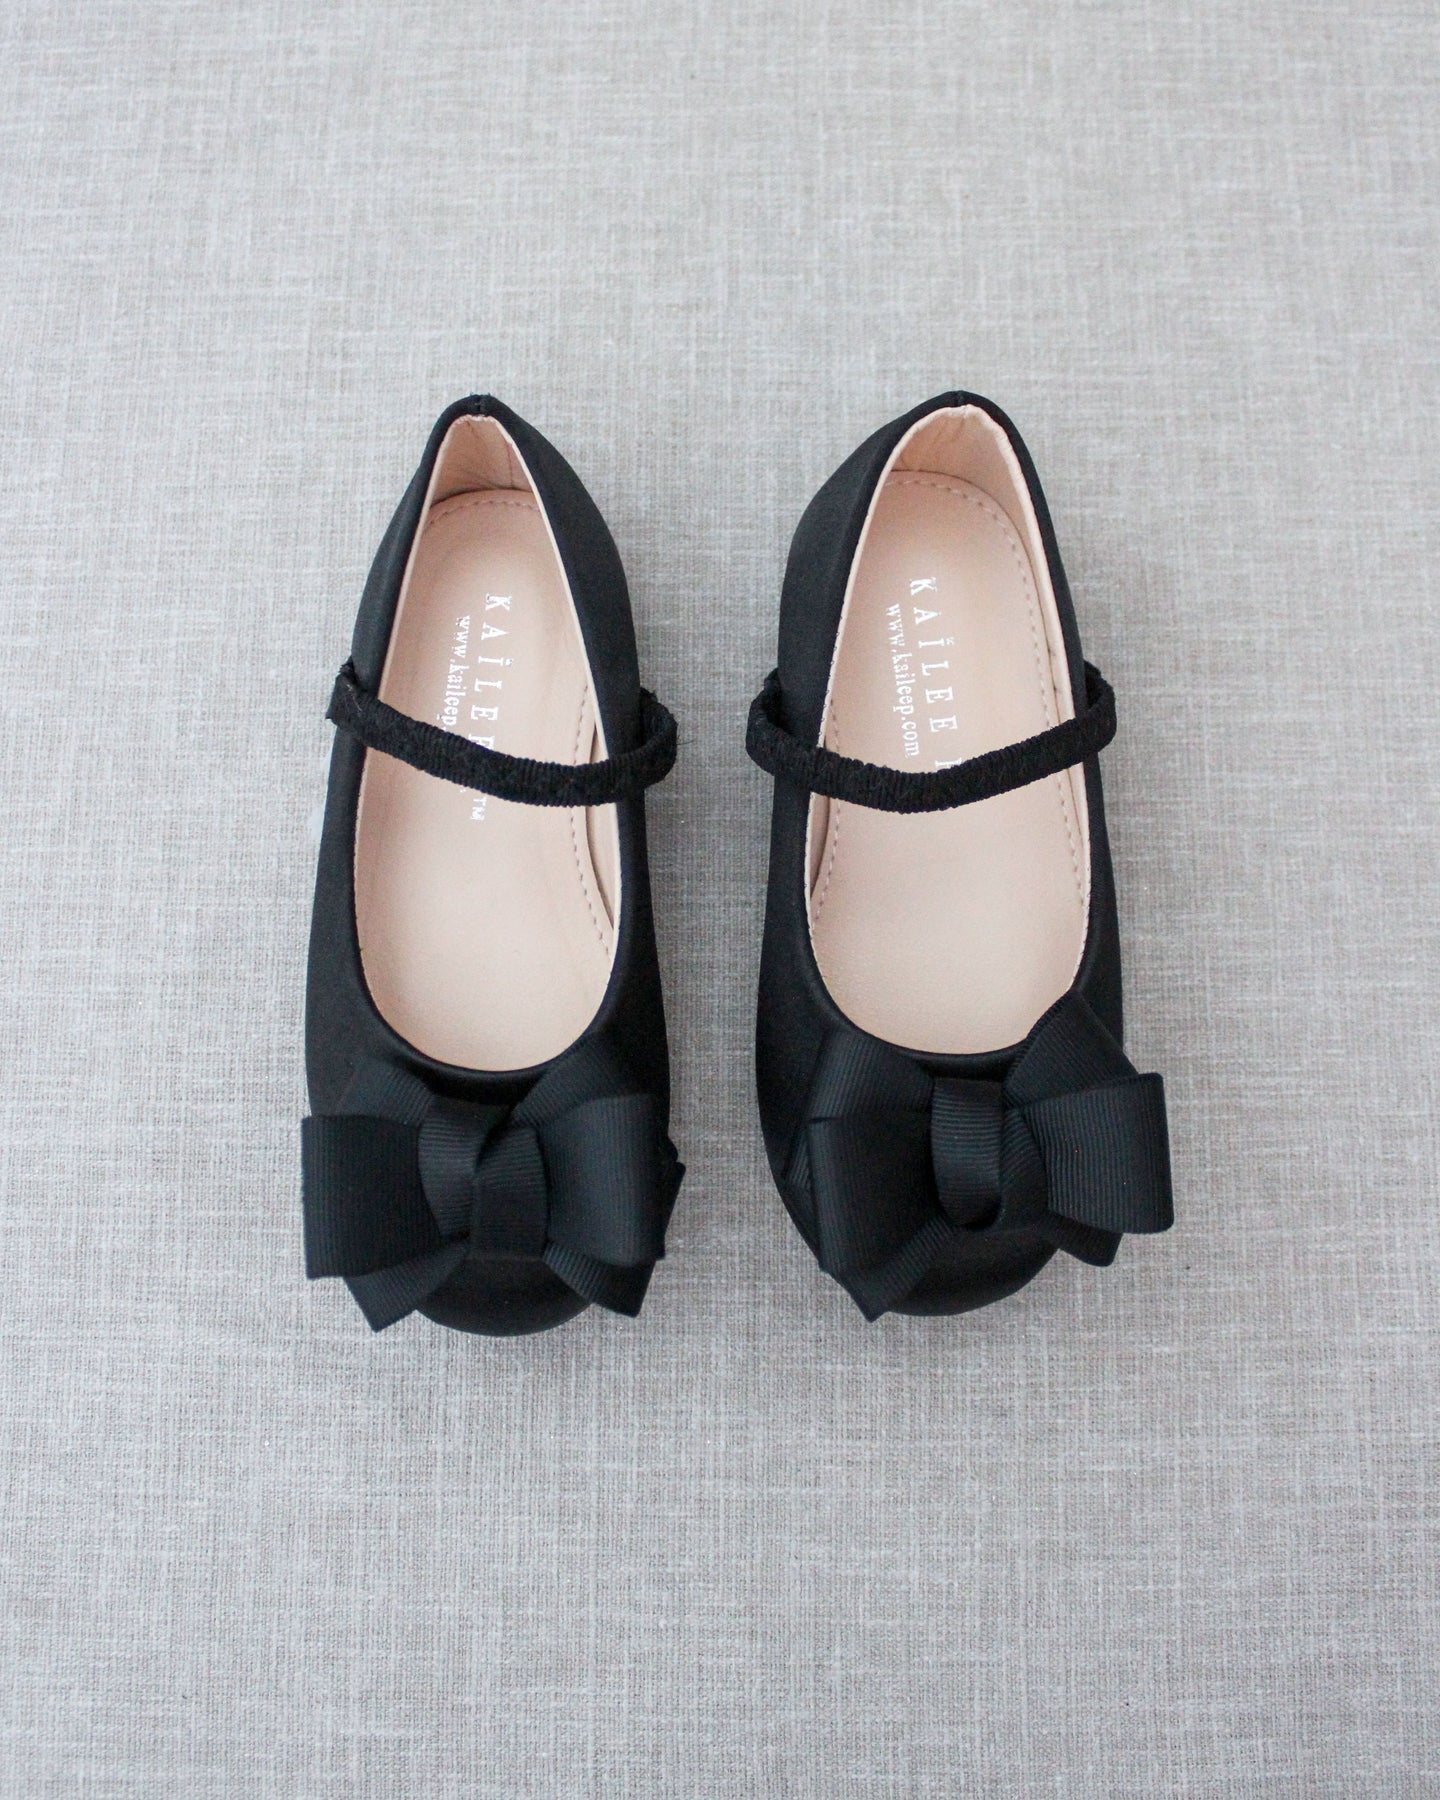 Black Satin Mary Jane Flats with Grosgrain Bow - Flower Girl Shoes, Party Shoes, Black Shoes 4 Big Kid